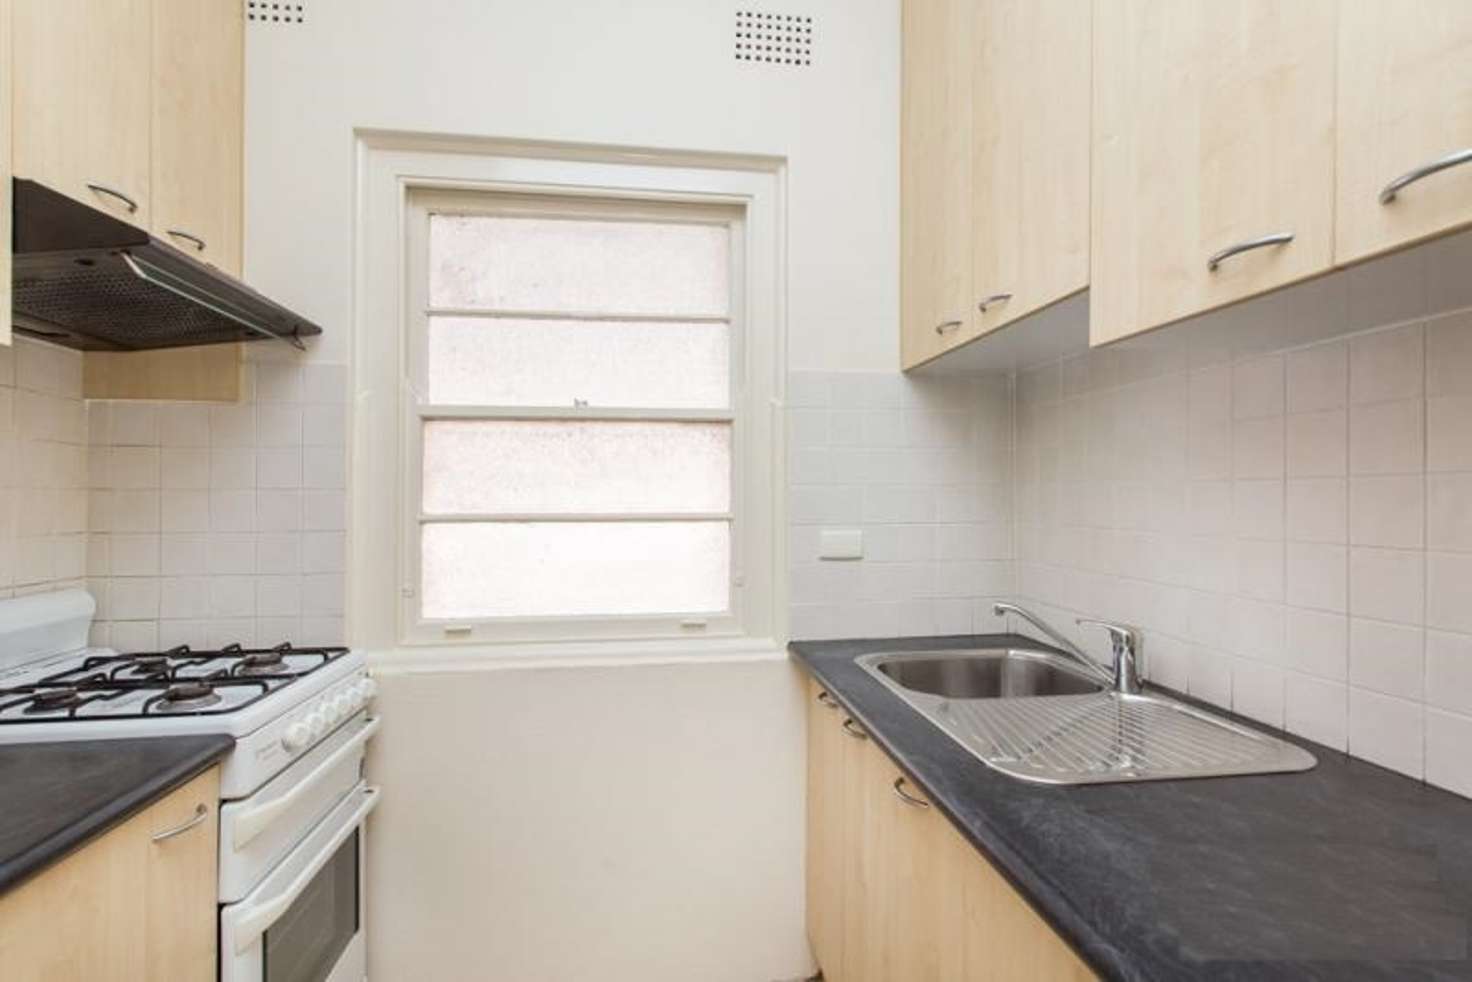 Main view of Homely apartment listing, 7/2 Blue St, North Sydney NSW 2060